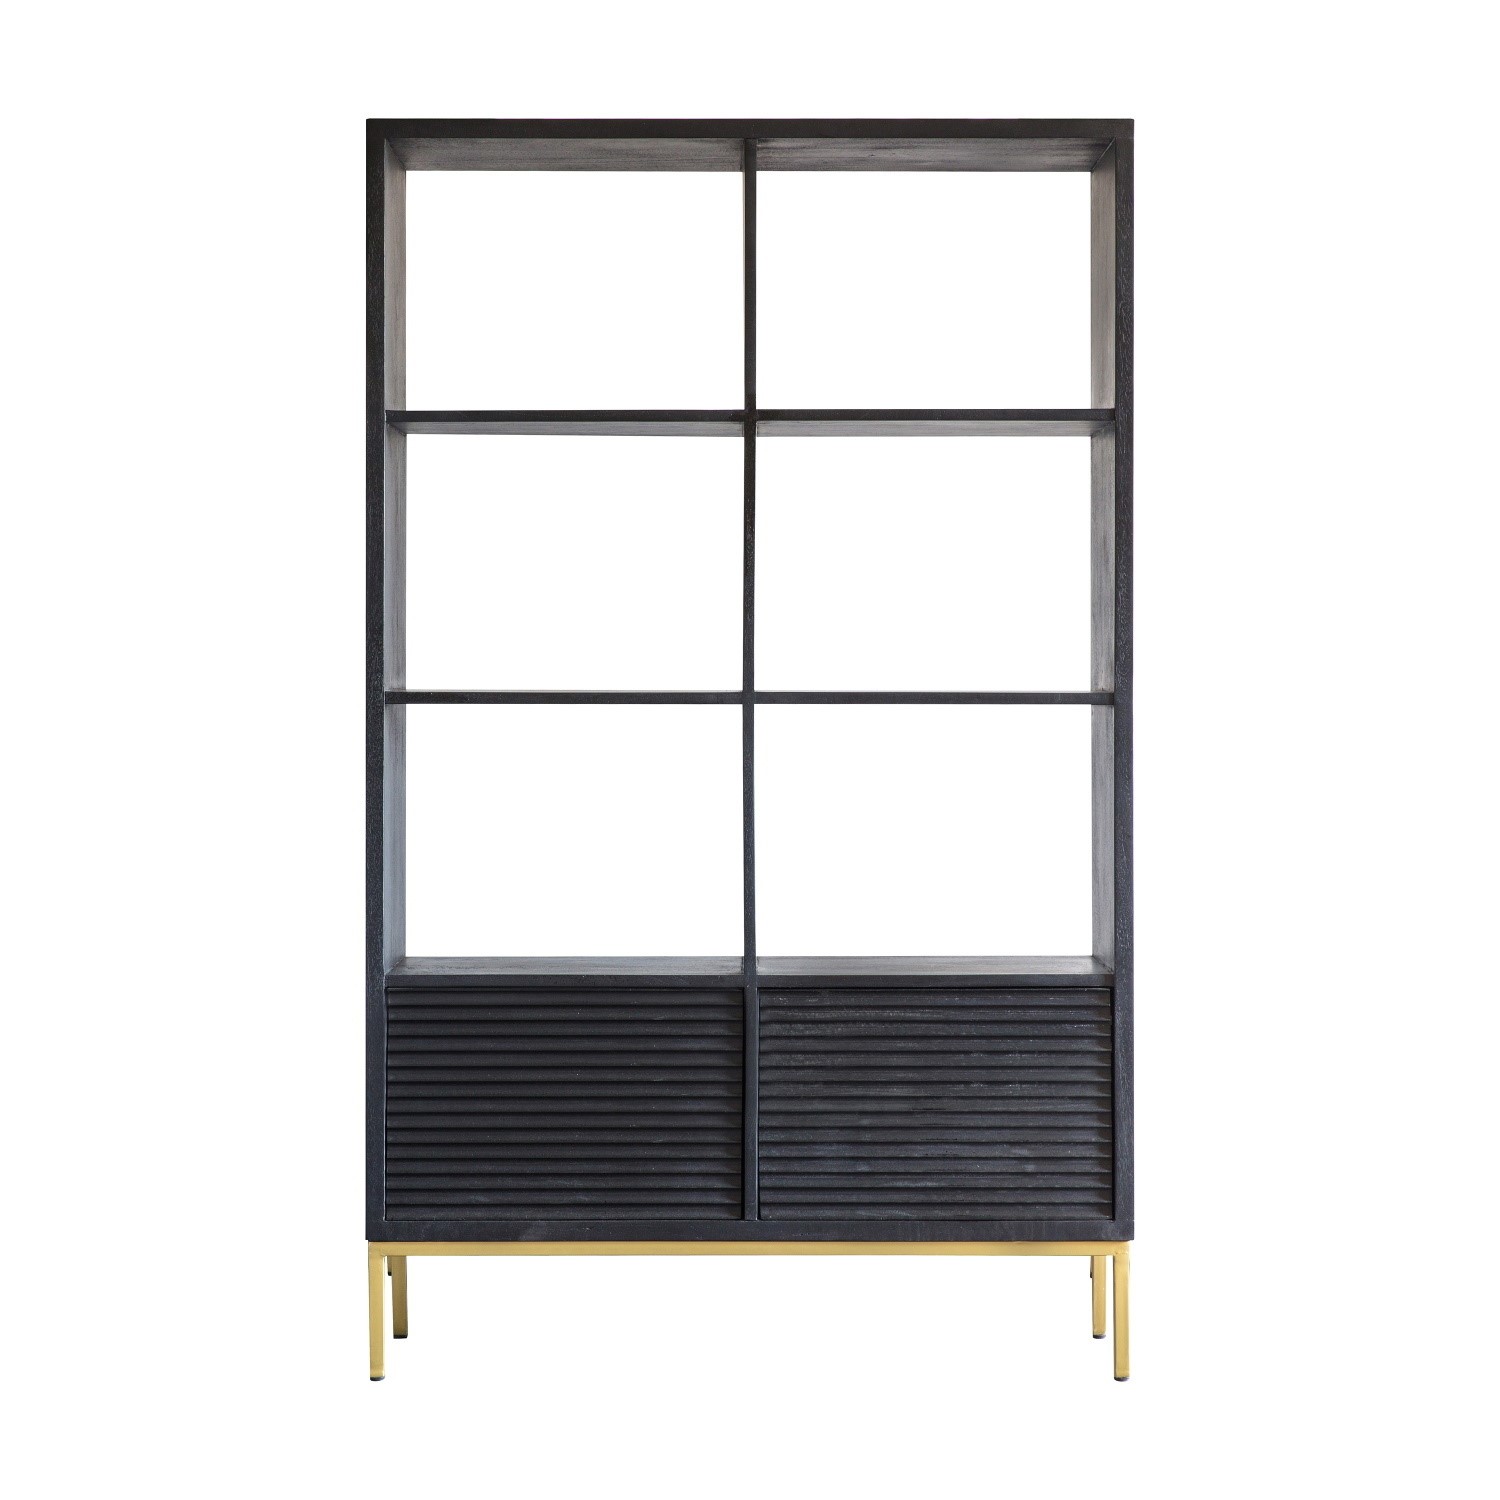 Read more about Tall black open shelf unit with 2 doors caspian house